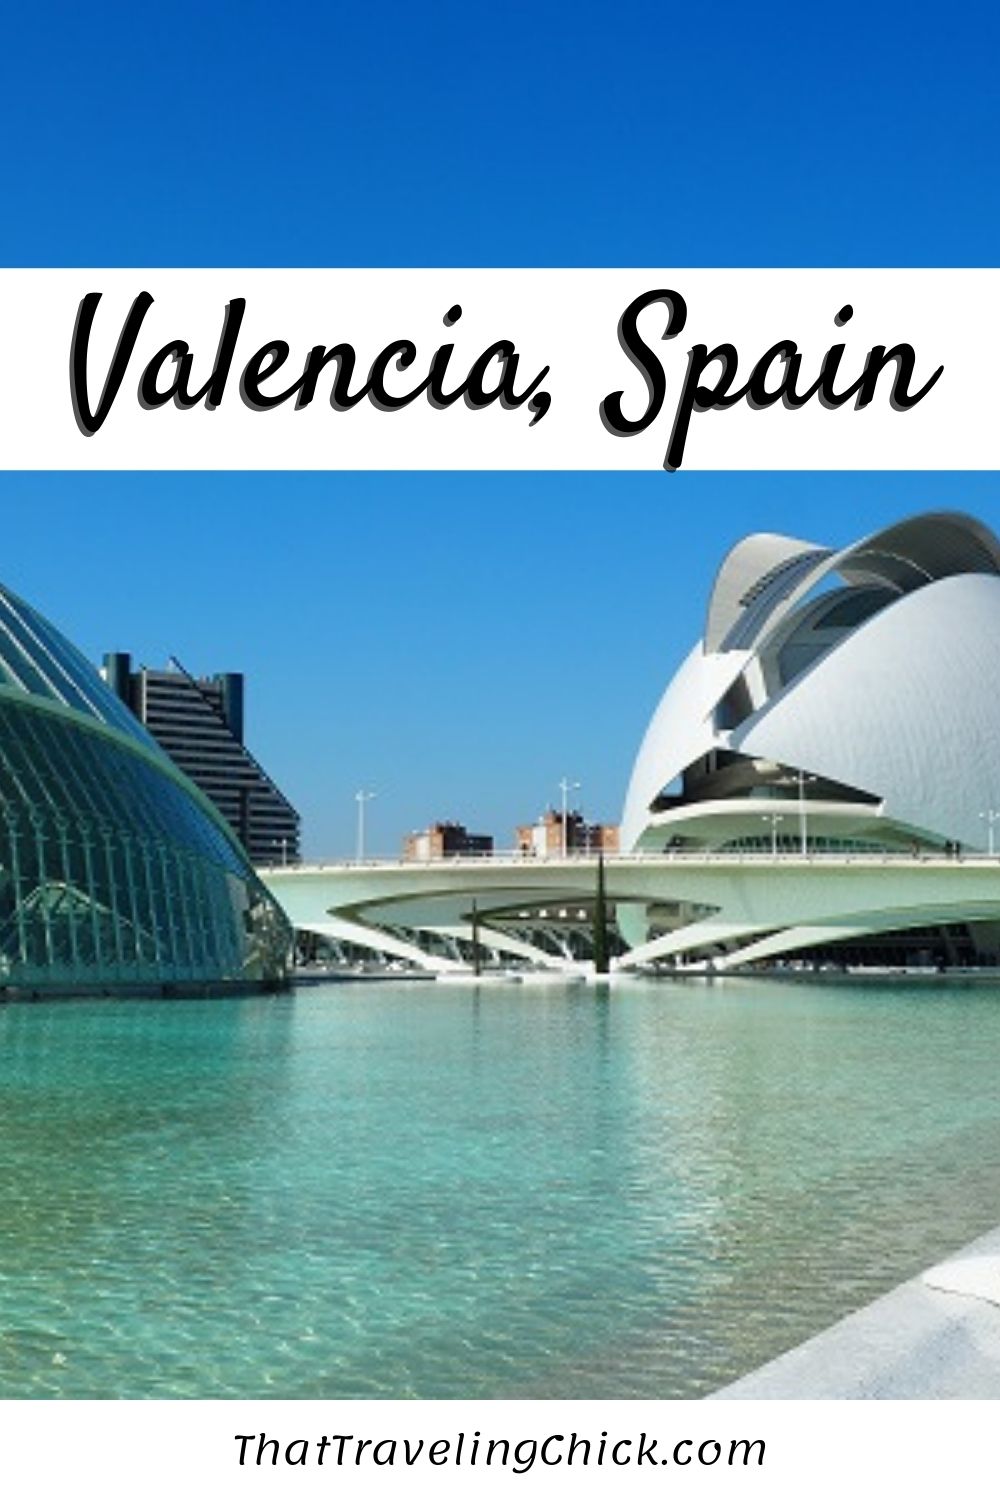 Valencia Spain is one of the best places to visit in Spain #valenciaspain #spain #placestovisitinspain